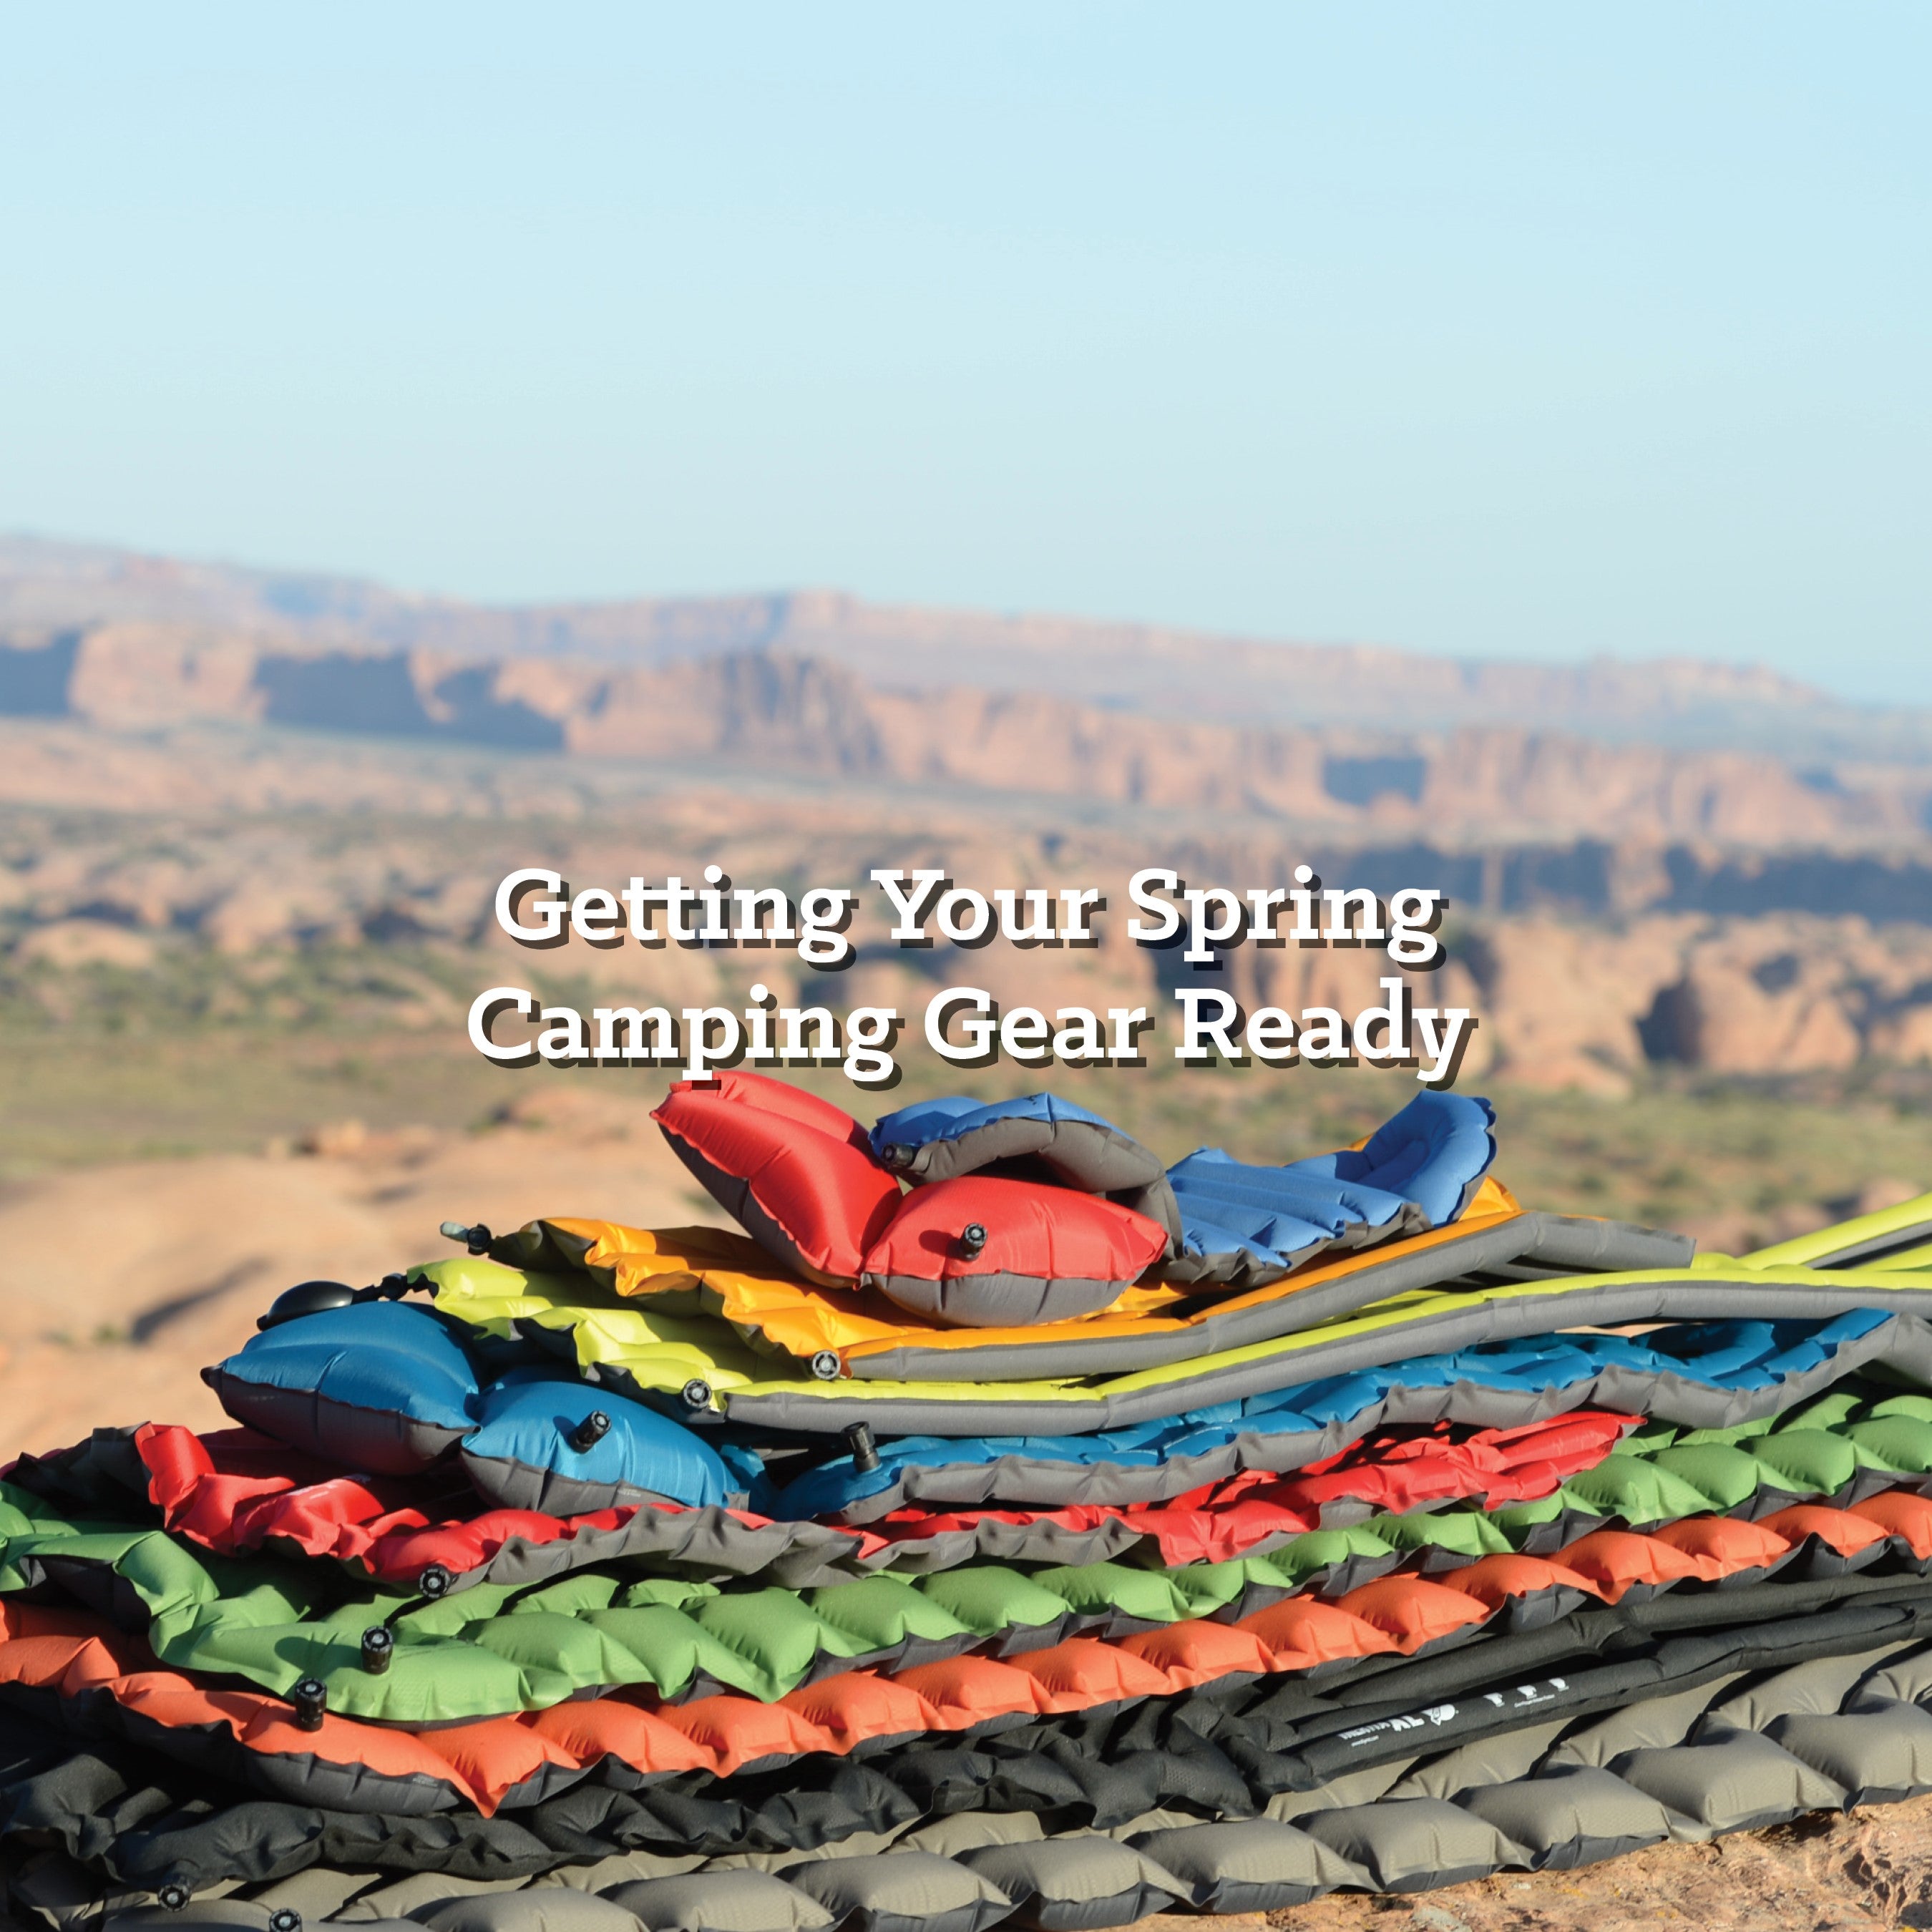 Getting Your Spring Camping Gear Ready